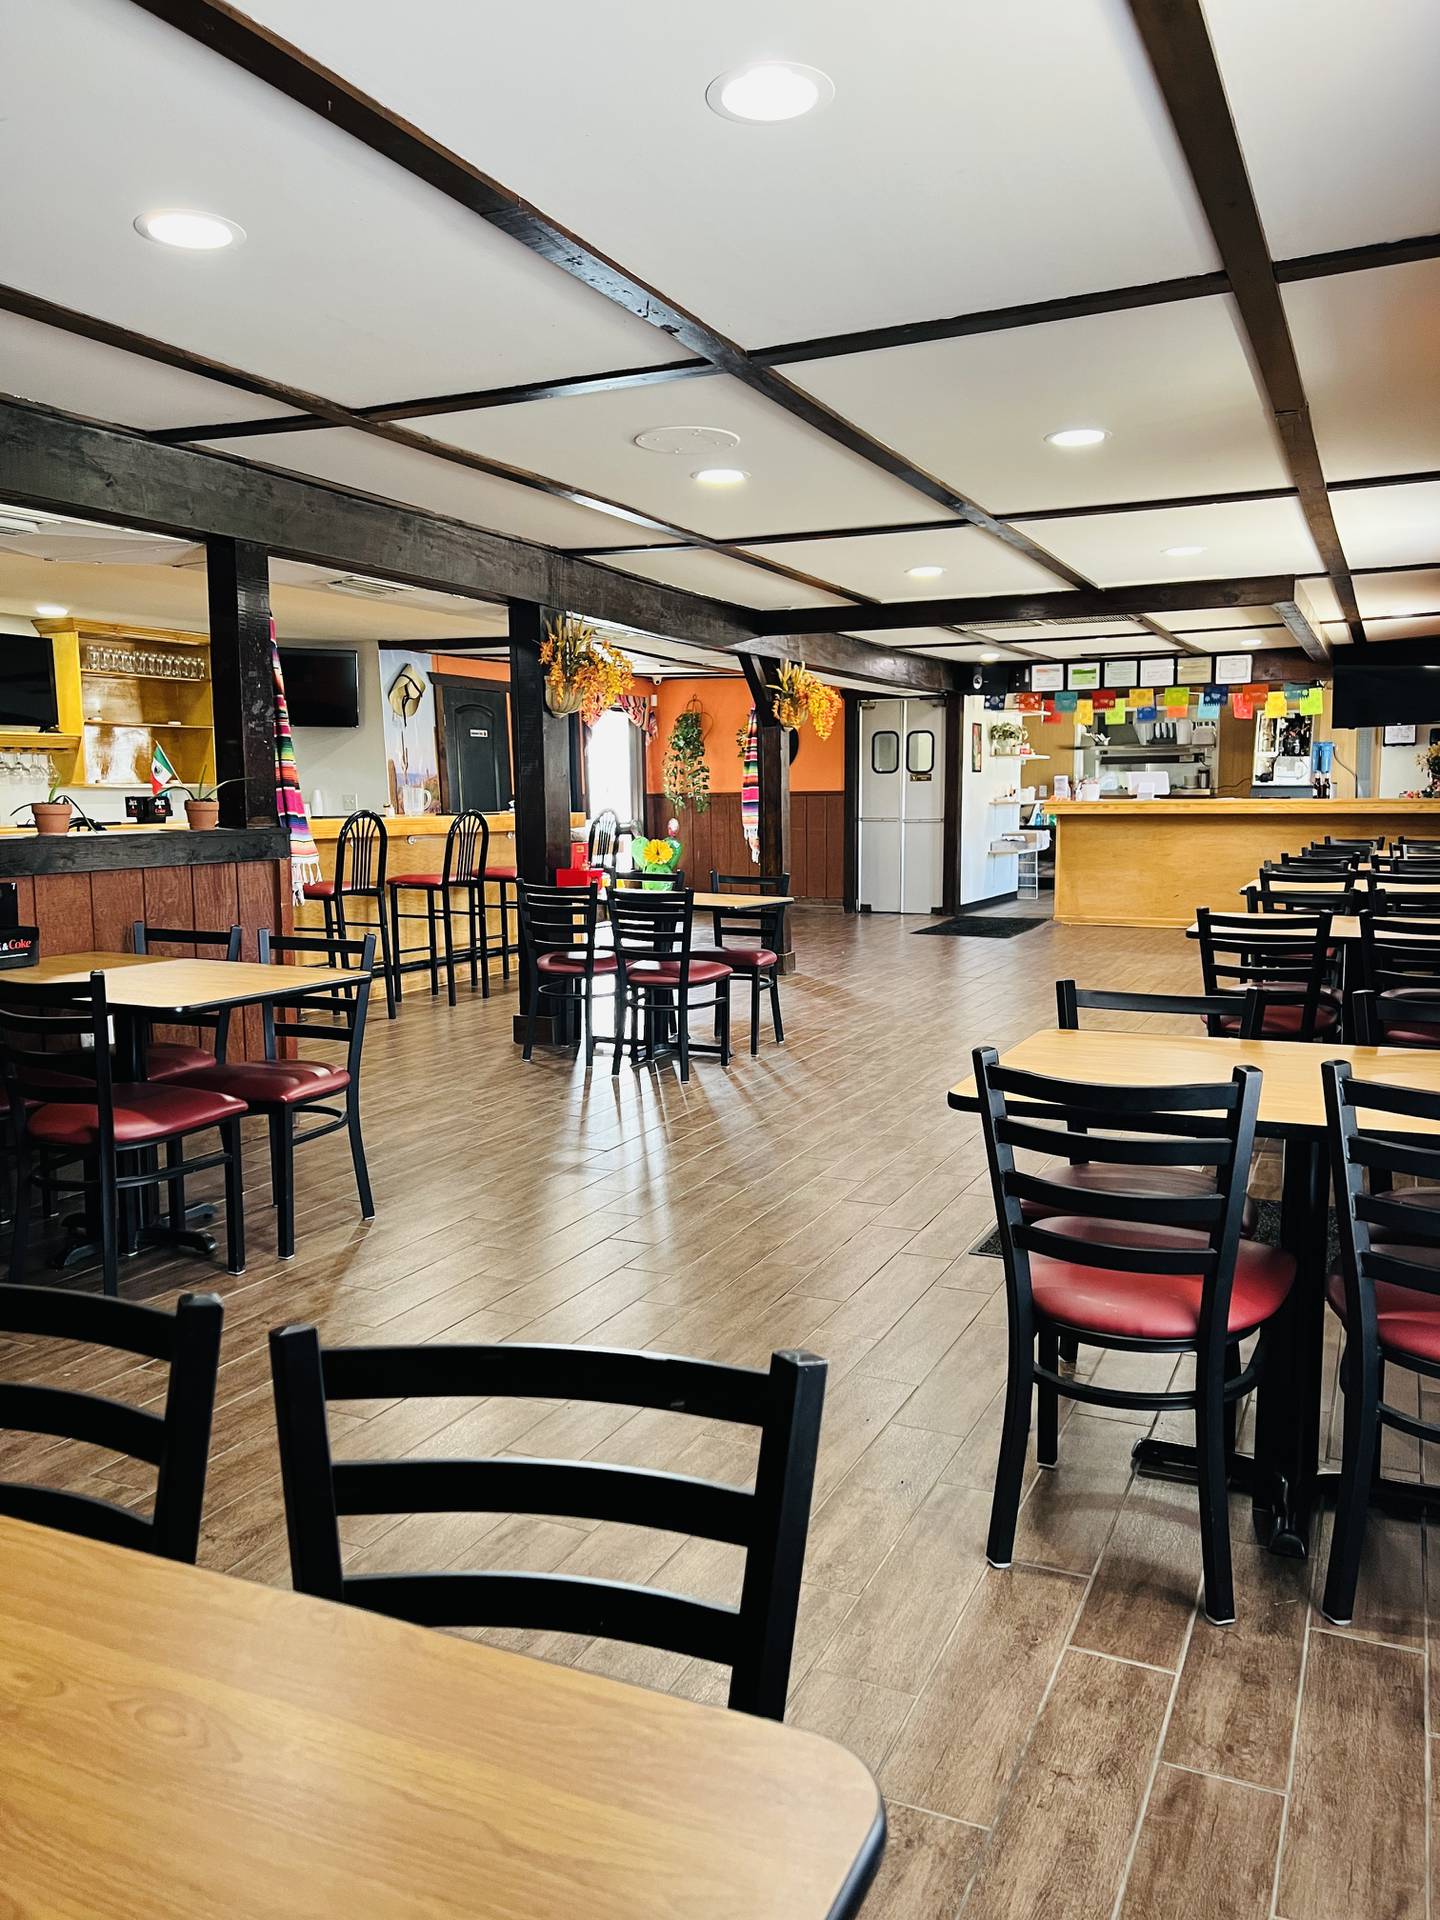 Tierra Caliente, located at 14801 Washington Street, is having a grand opening on Aug. 15, 2022. The restaurant will have karaoke Thursdays, outdoor events with live music outdoor dining and an open volleyball net. (Photos courtesy of Yuridia Pineda)